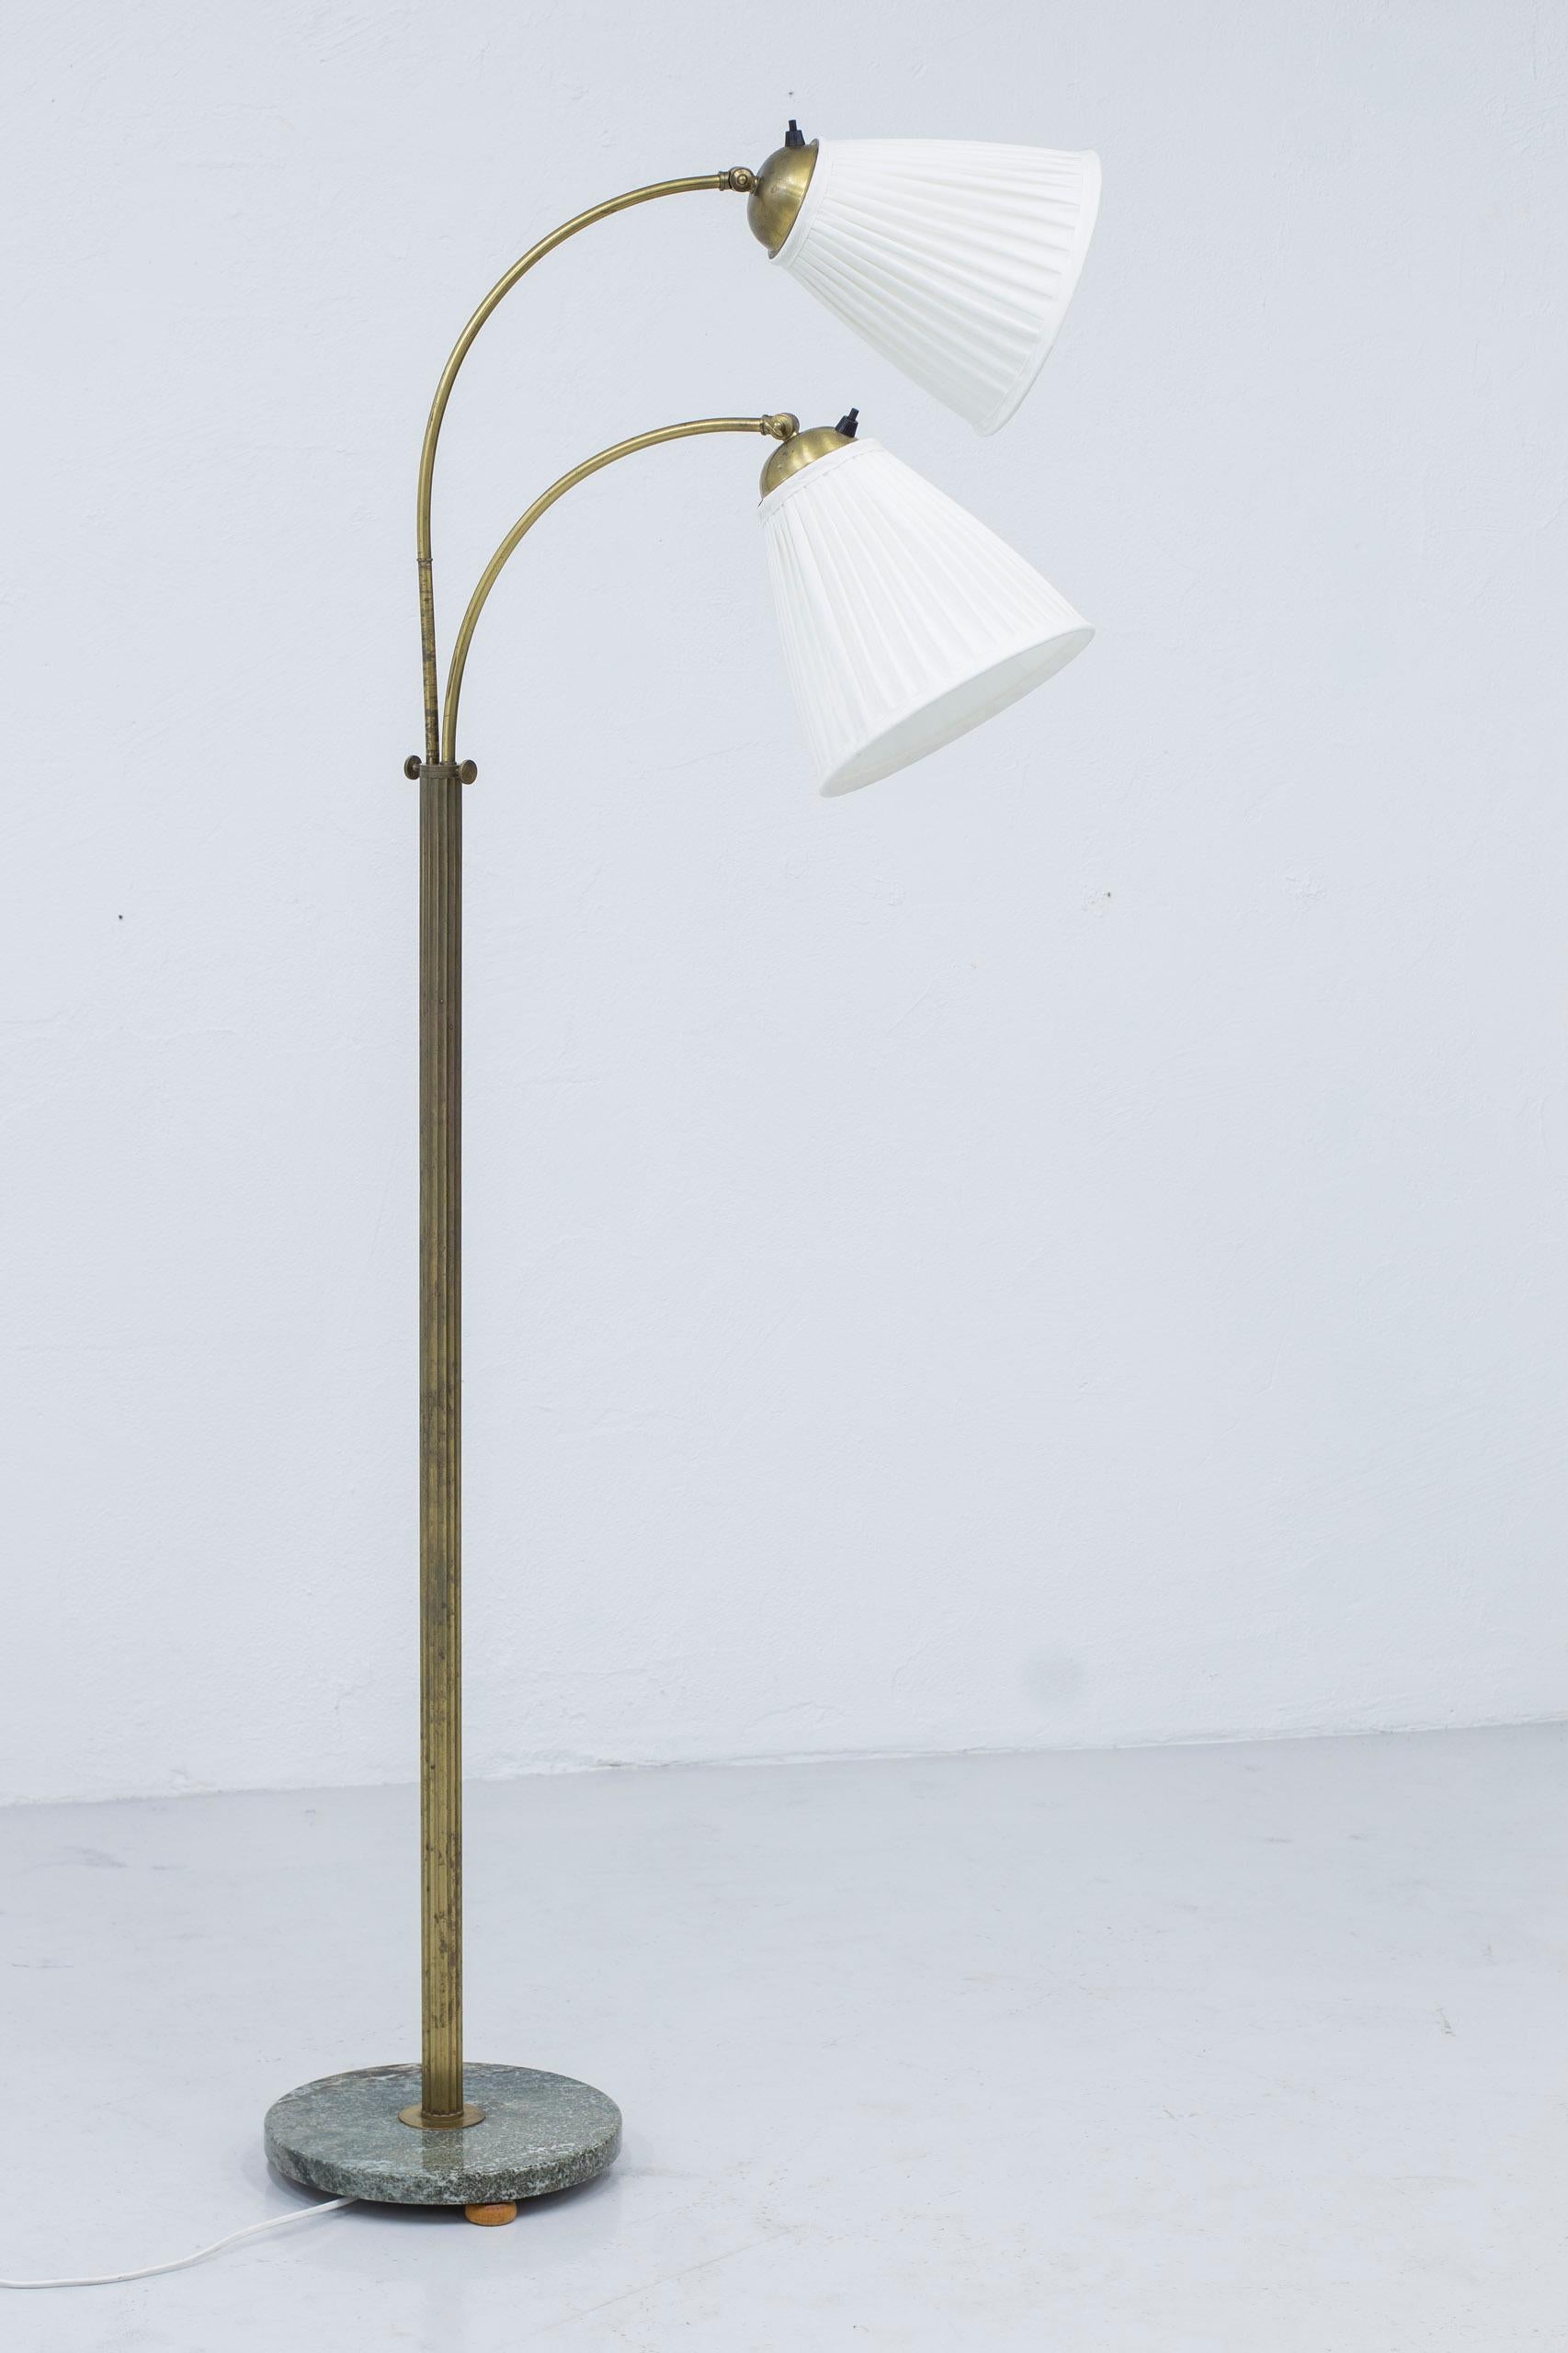 Swedish Modern floor lamp by unknown maker and designer. Made in Sweden ca 1940s. Fluted brass stem with two adjustable arms with custom brass hardware. Base made from Swedish 